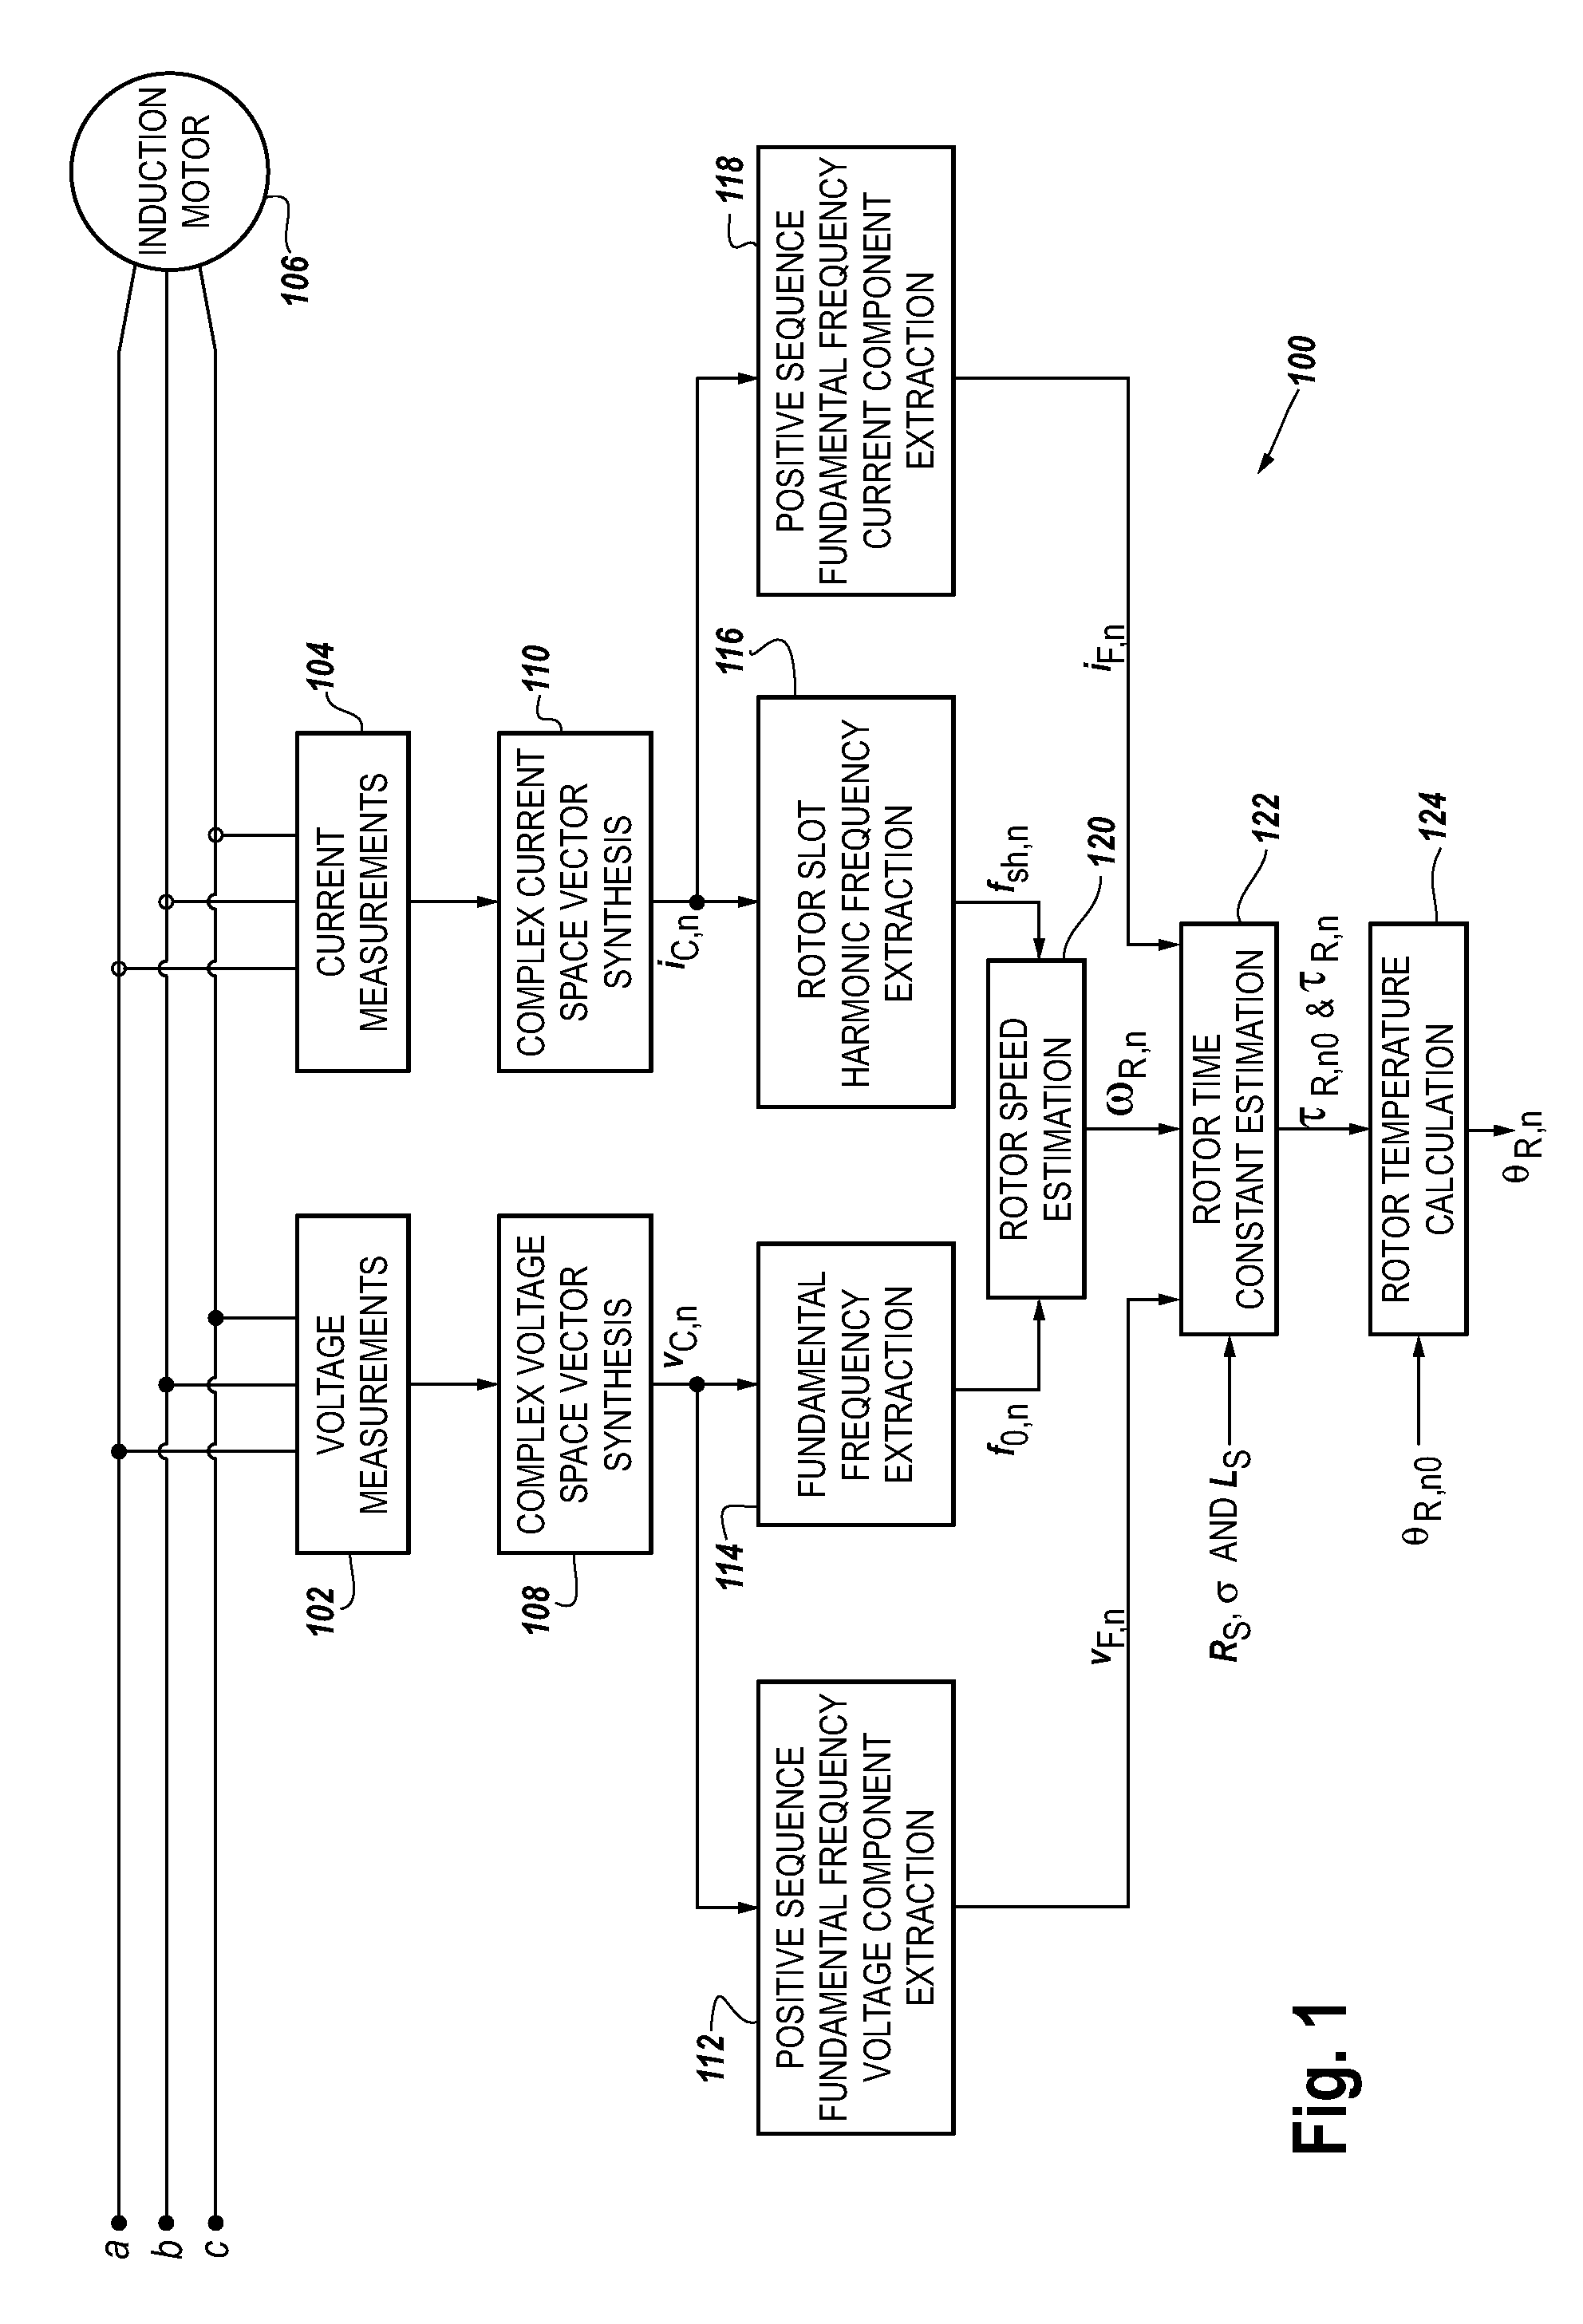 Method and apparatus for estimating induction motor rotor temperature